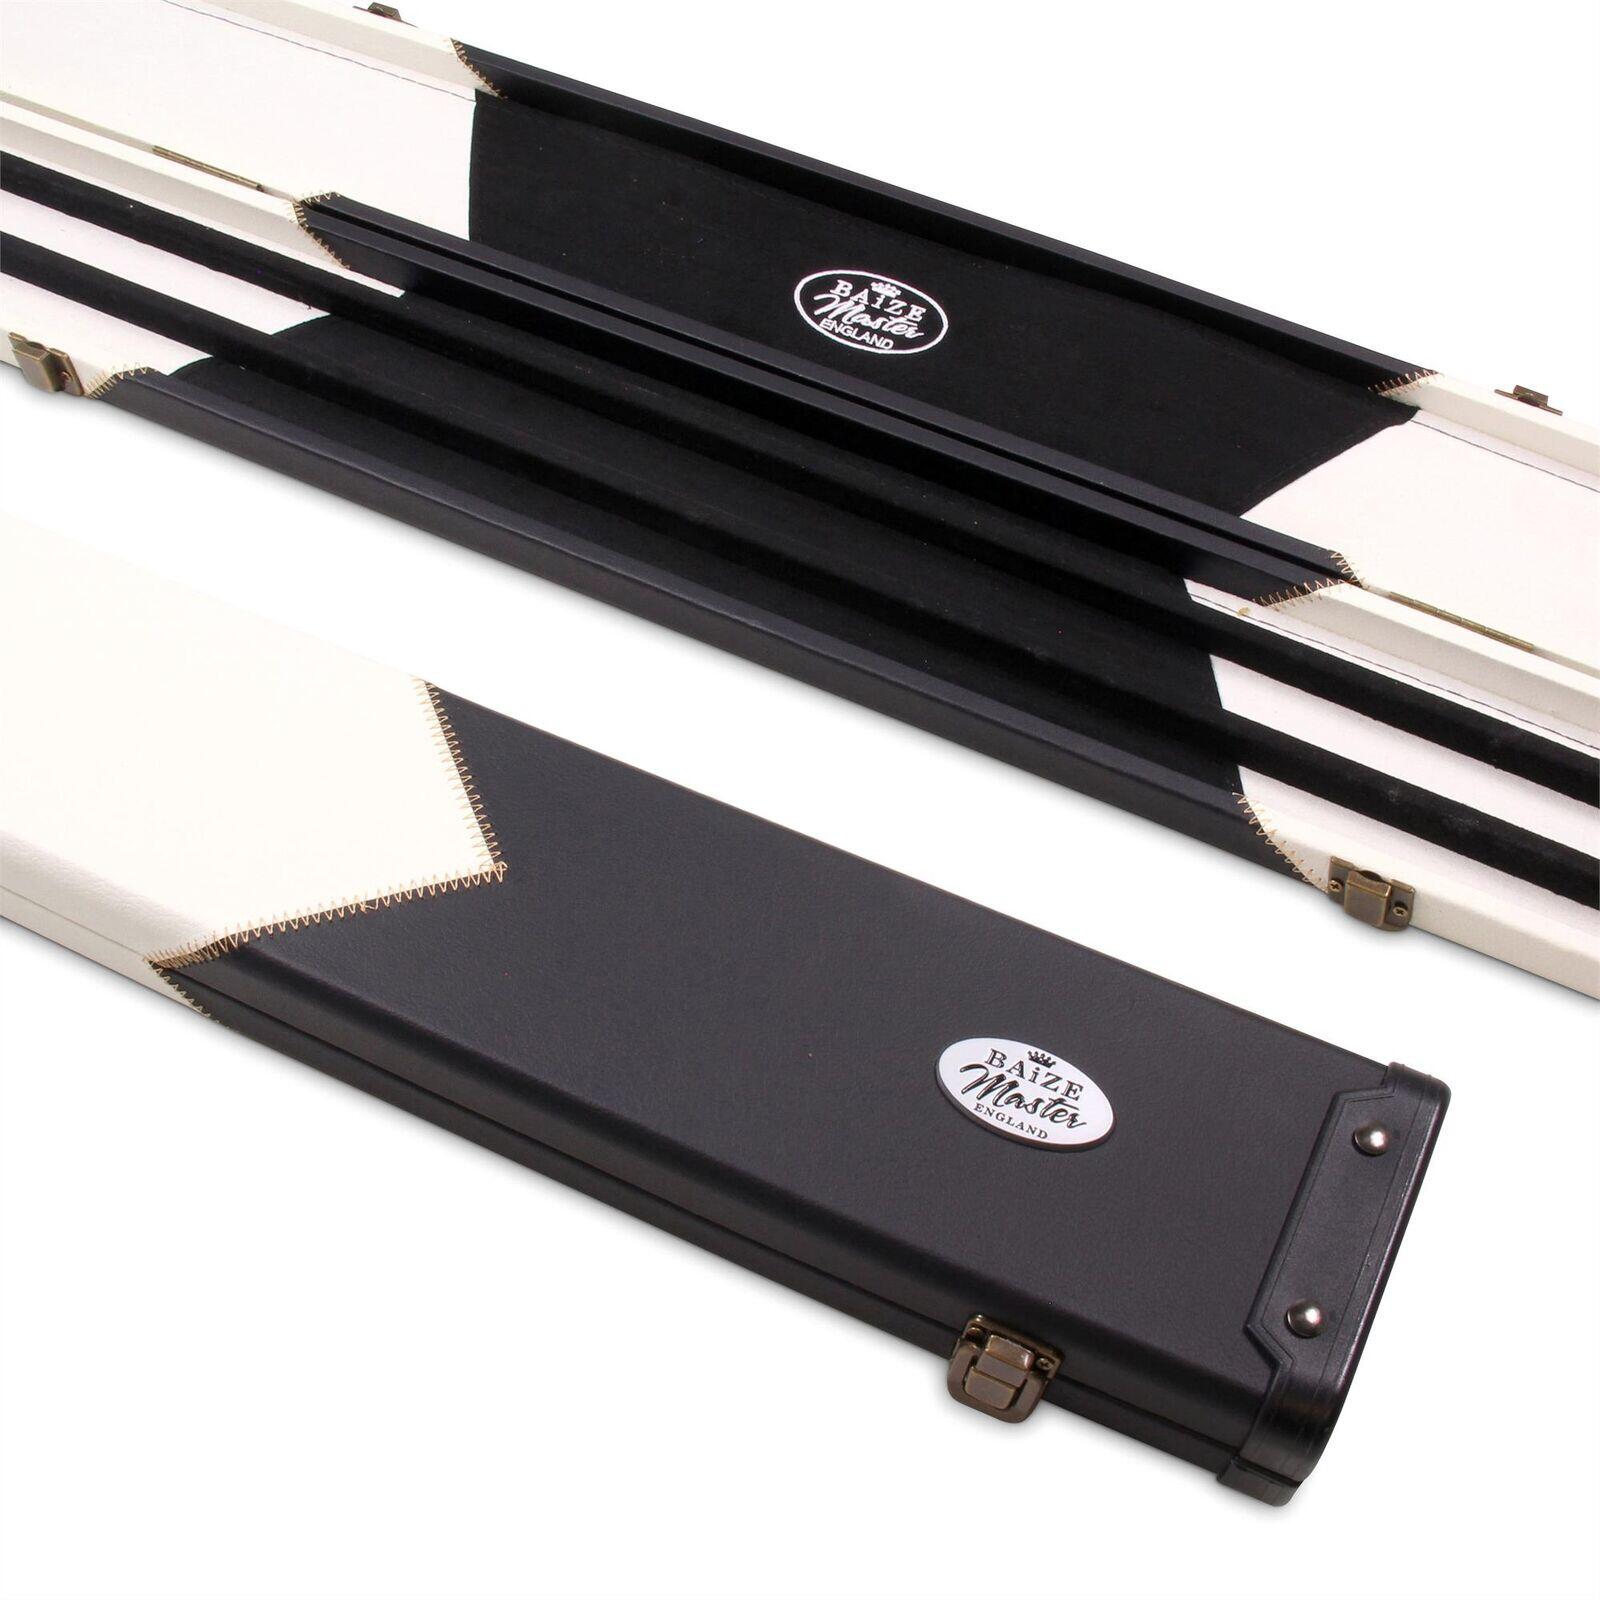 Baize Master 1 Piece WIDE WHITE ARROW Snooker Pool Cue Case - Holds 3 Cues 1/7